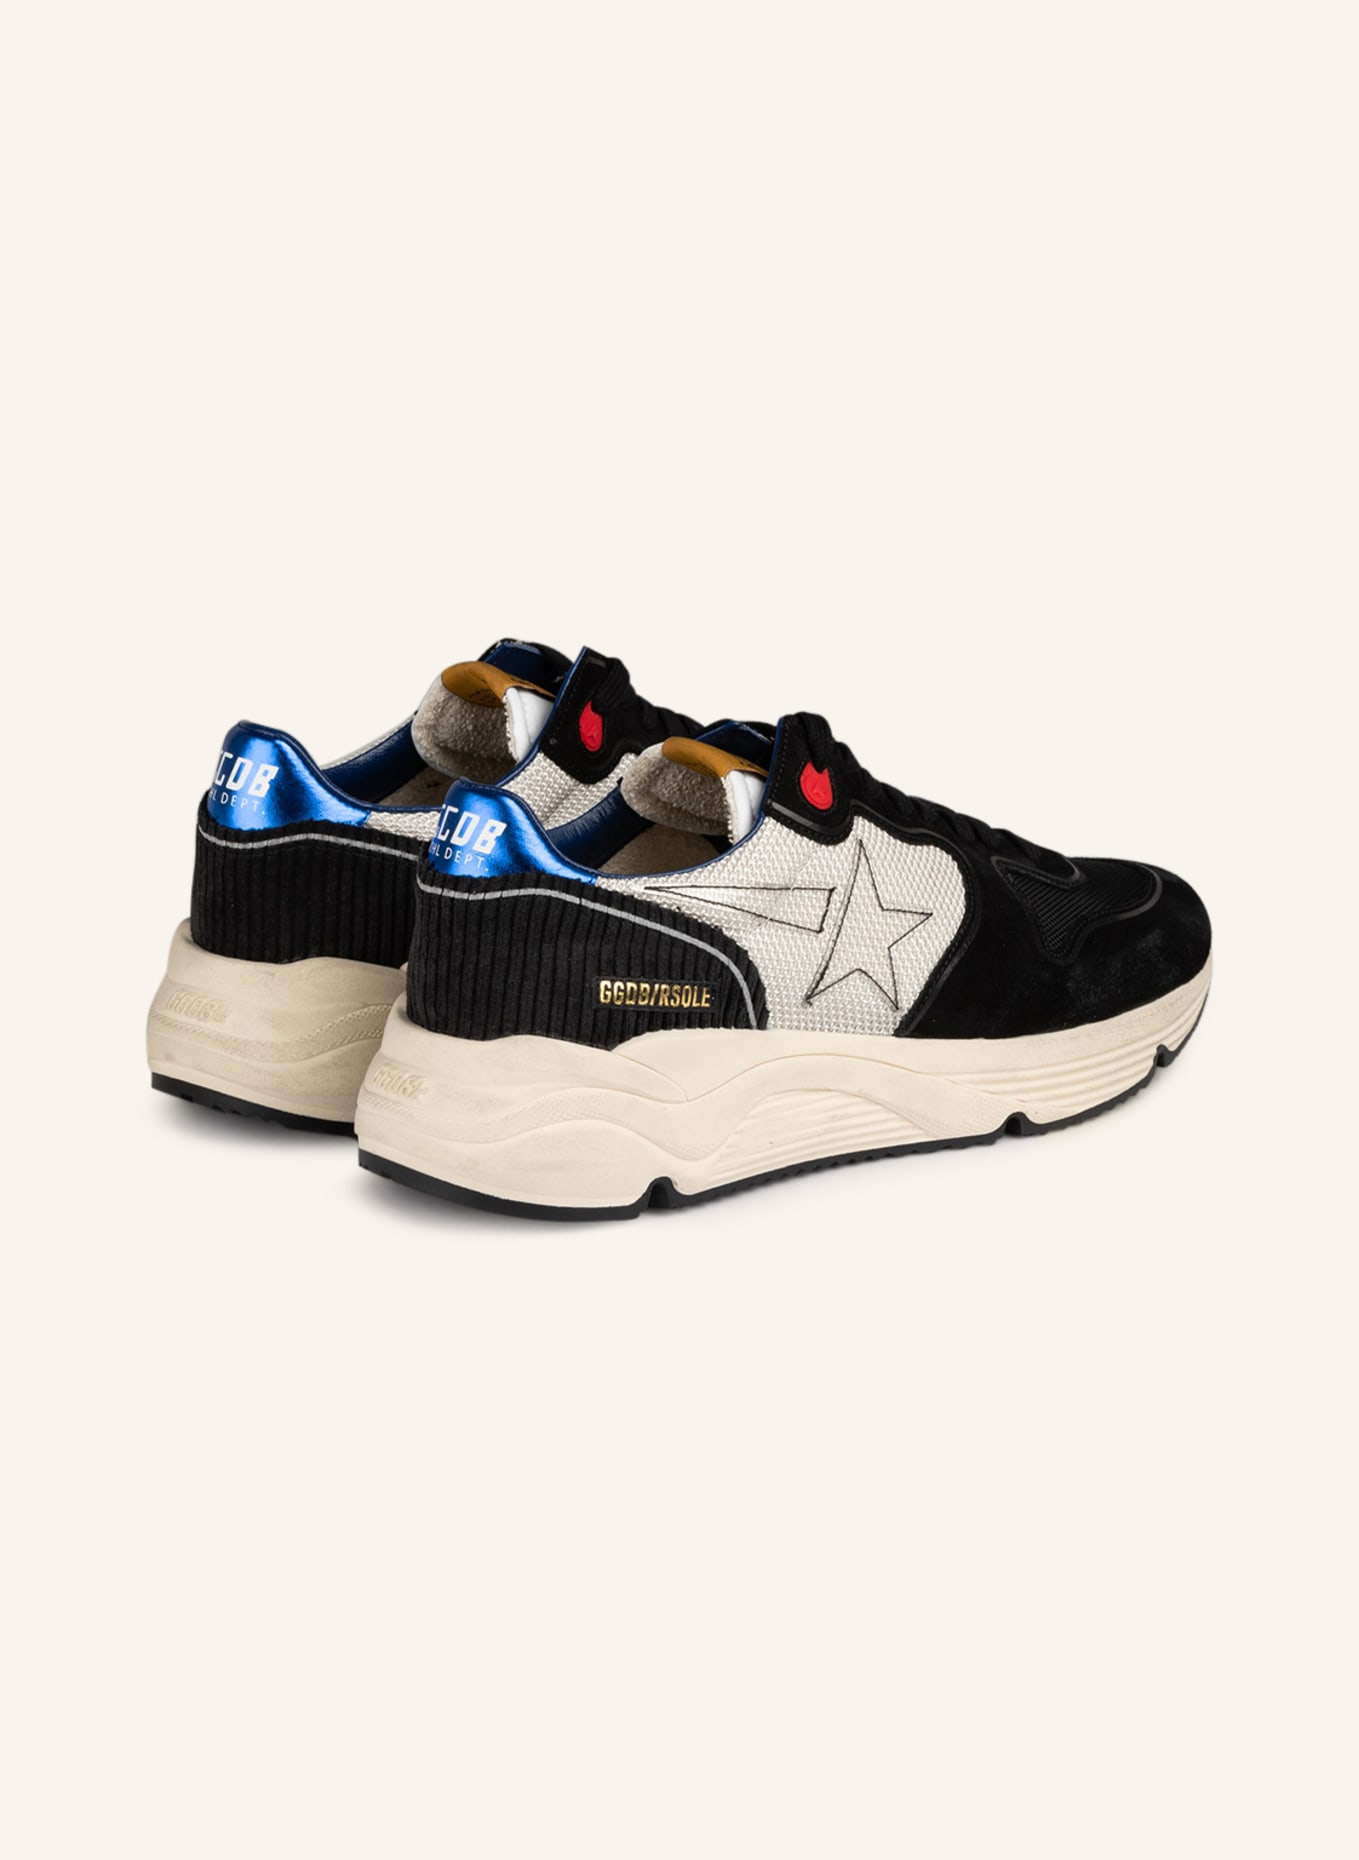 GOLDEN GOOSE Sneakers RUNNING SOLE, Color: BLACK/ LIGHT GRAY/ BLUE (Image 2)